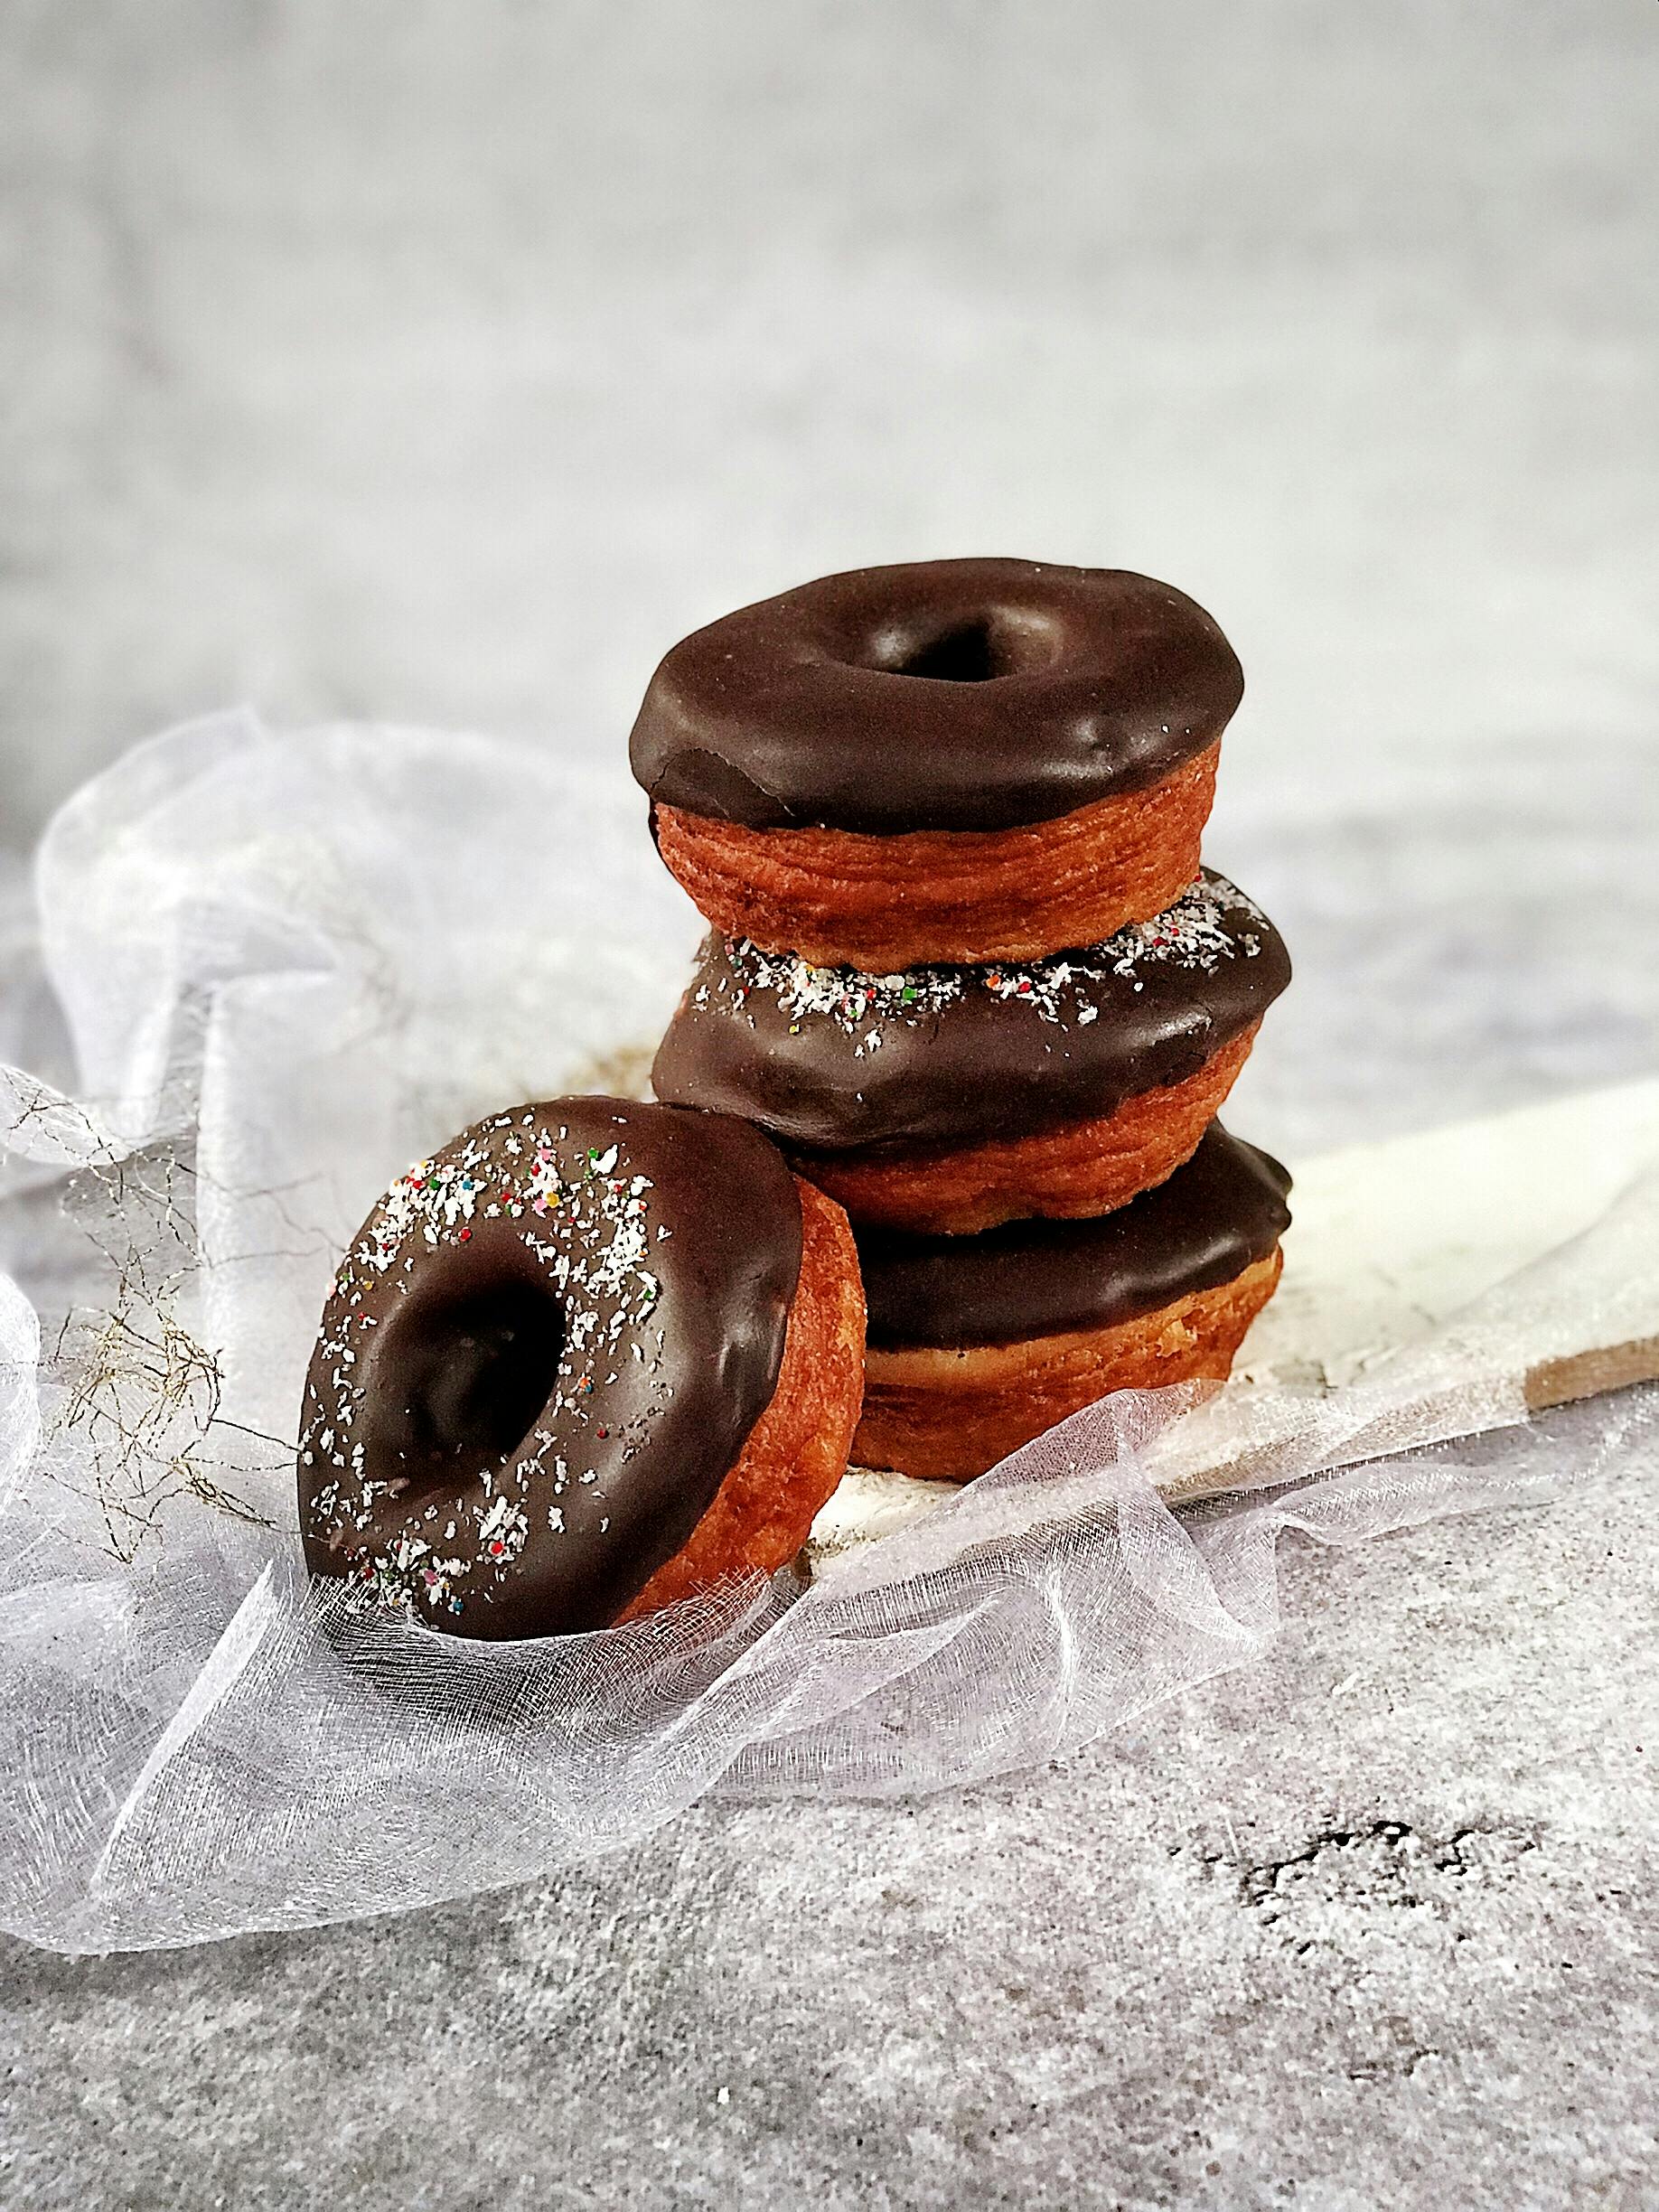 Close-Up Photo Of Stacked Chocolate Doughnuts · Free Stock Photo